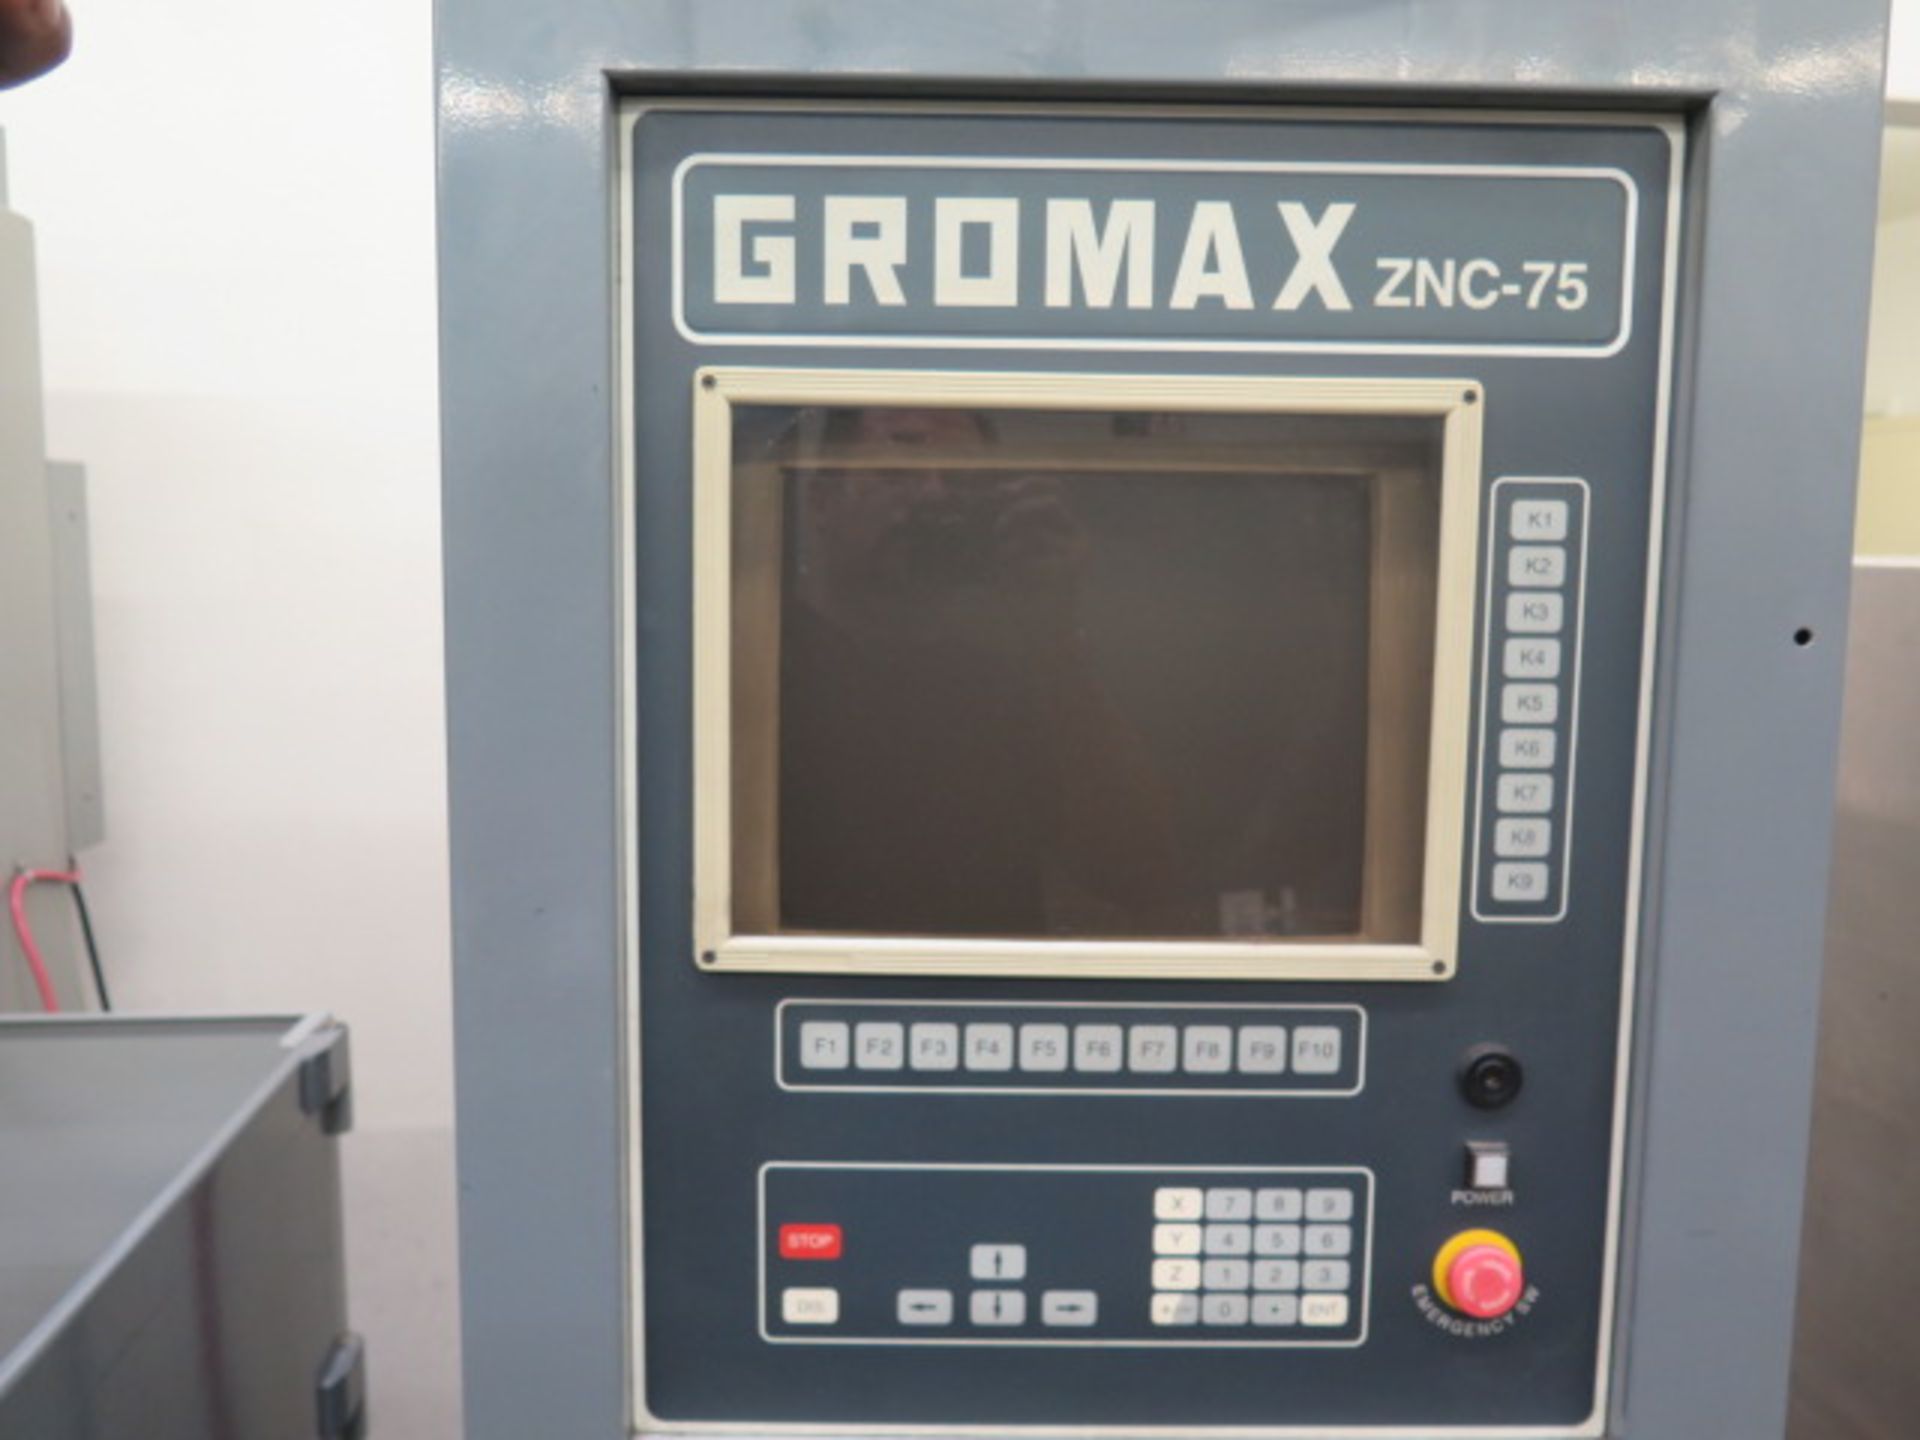 Gromax 36-E75A Die Sinker EDM w/ Gromax ZNC-75 75 Amp Power Source, 16" x 12.5" x 12", SOLD AS IS - Image 15 of 18